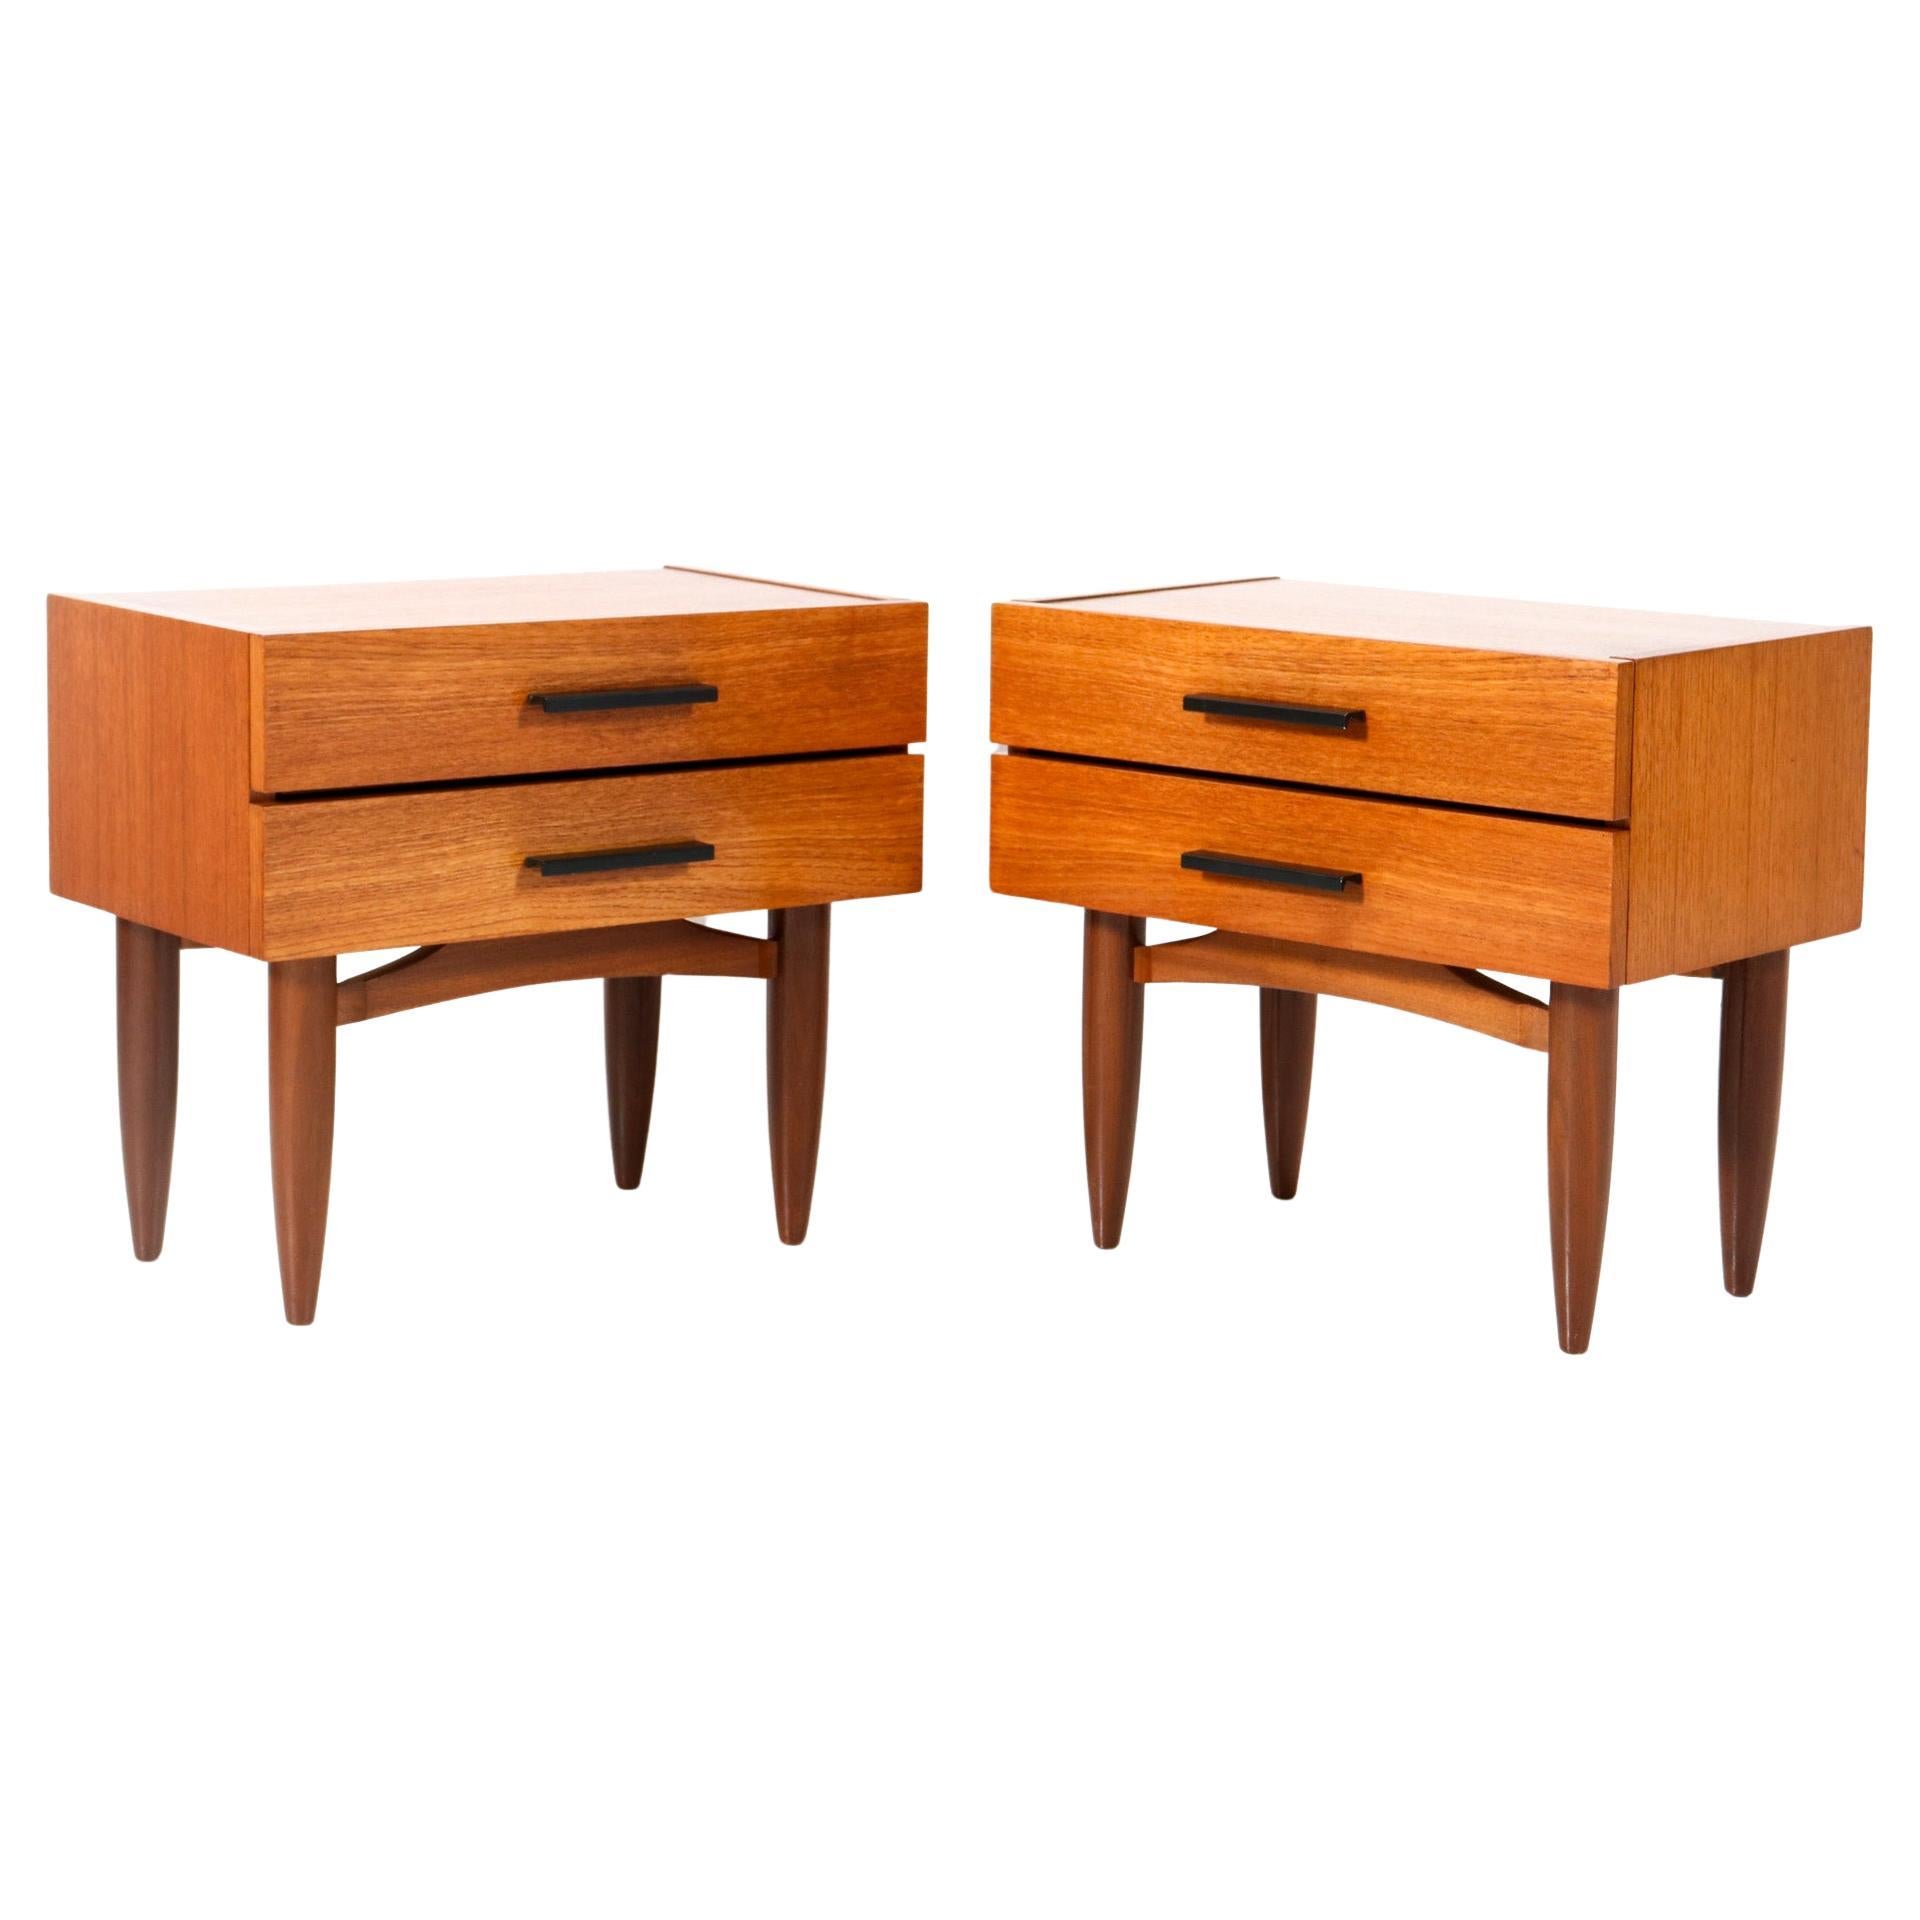 Two Teak Mid-Century Modern Nightstands or Bedside Tables, 1960s